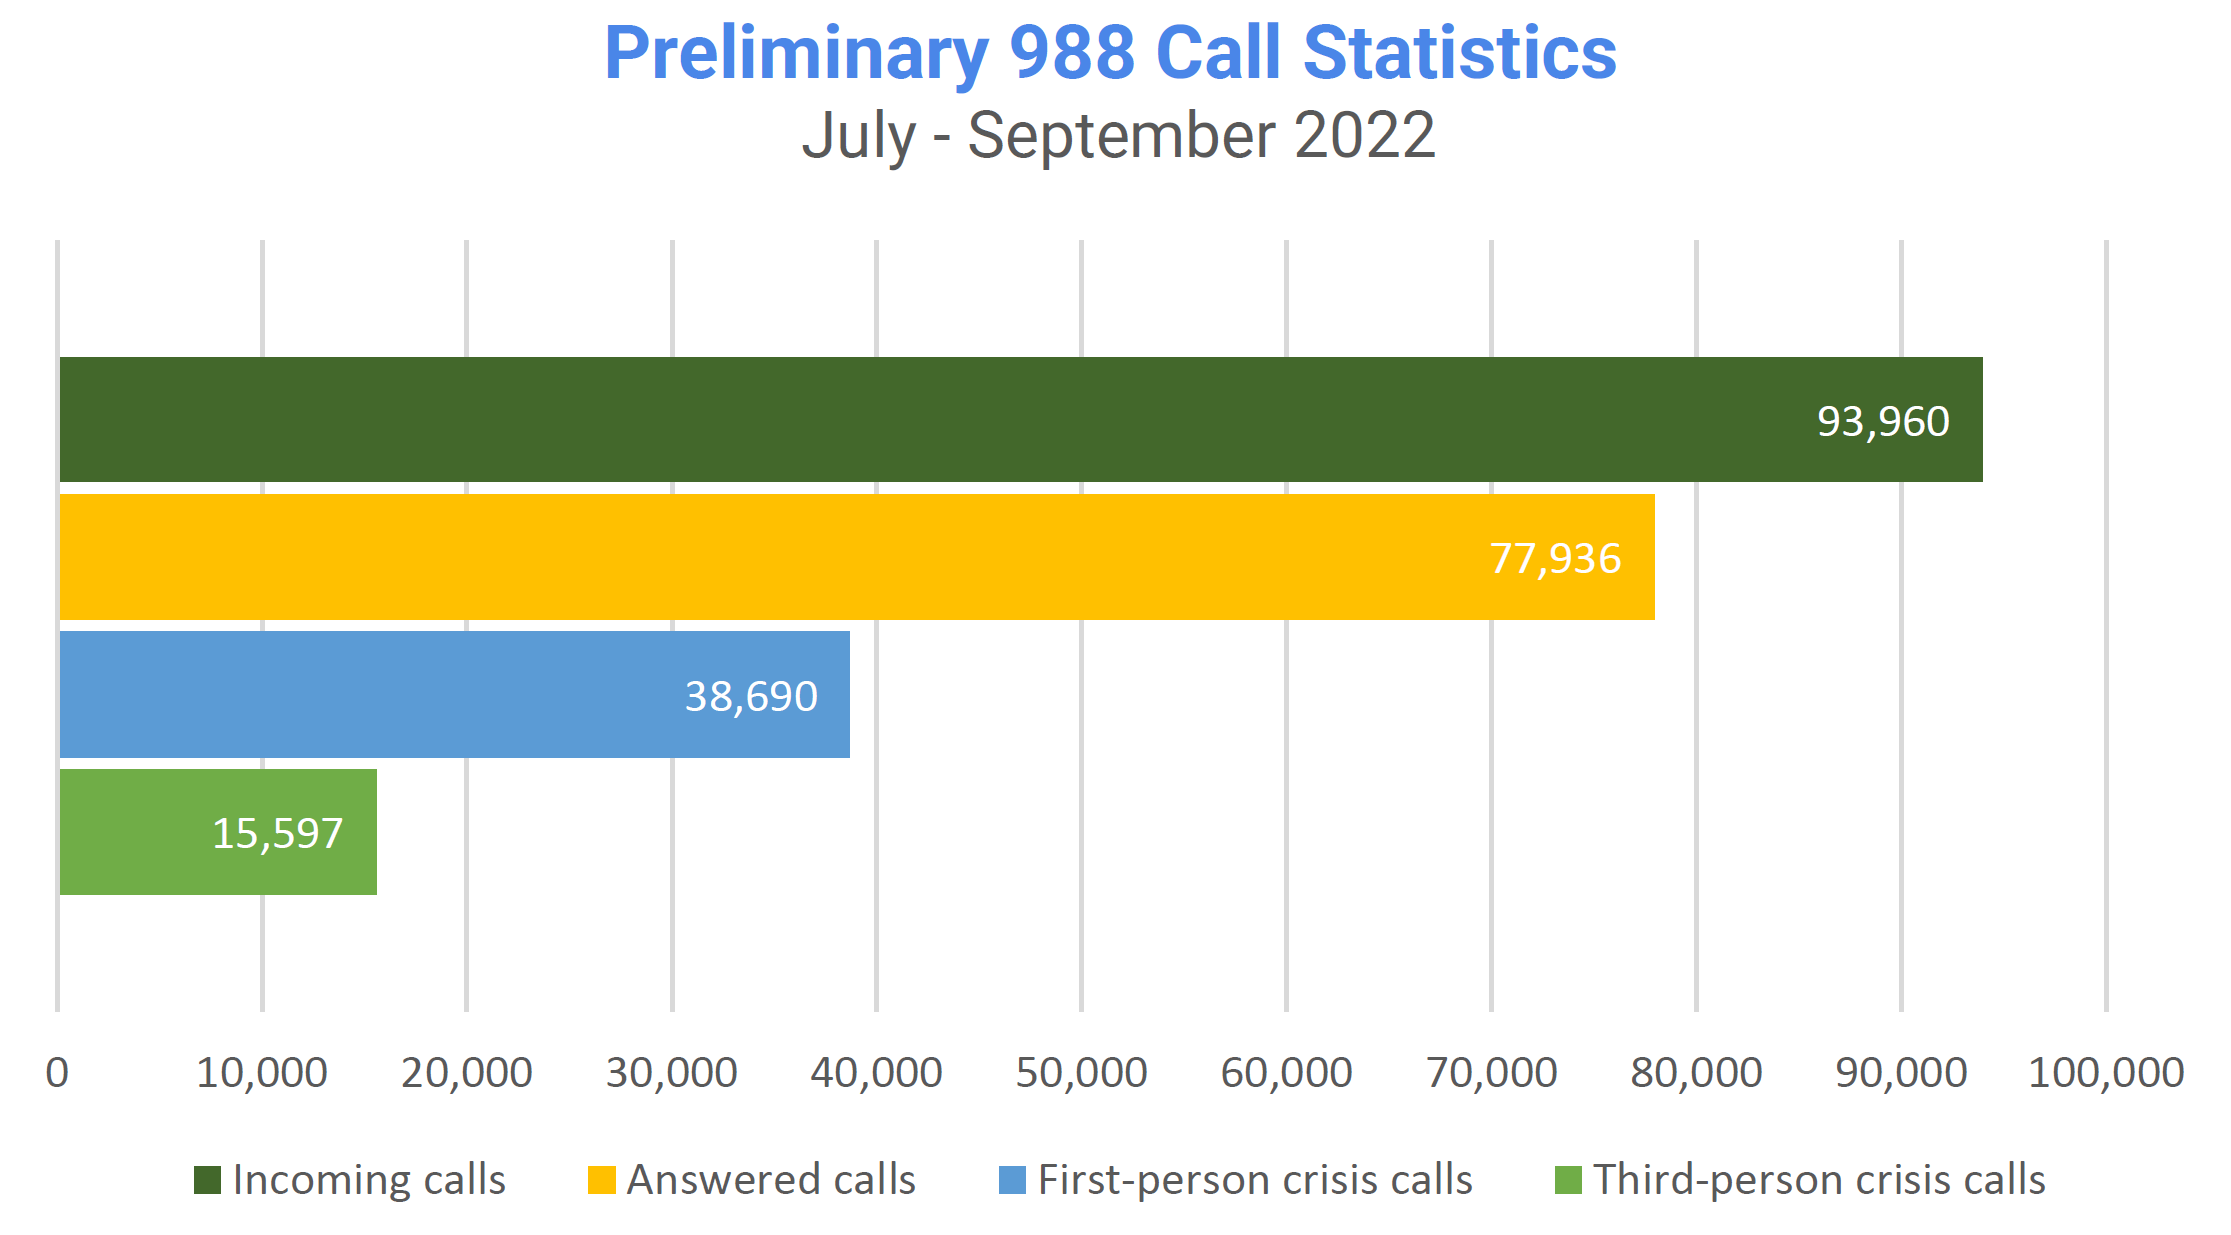 Graph for Preliminary 988 call statistics July to September 2022